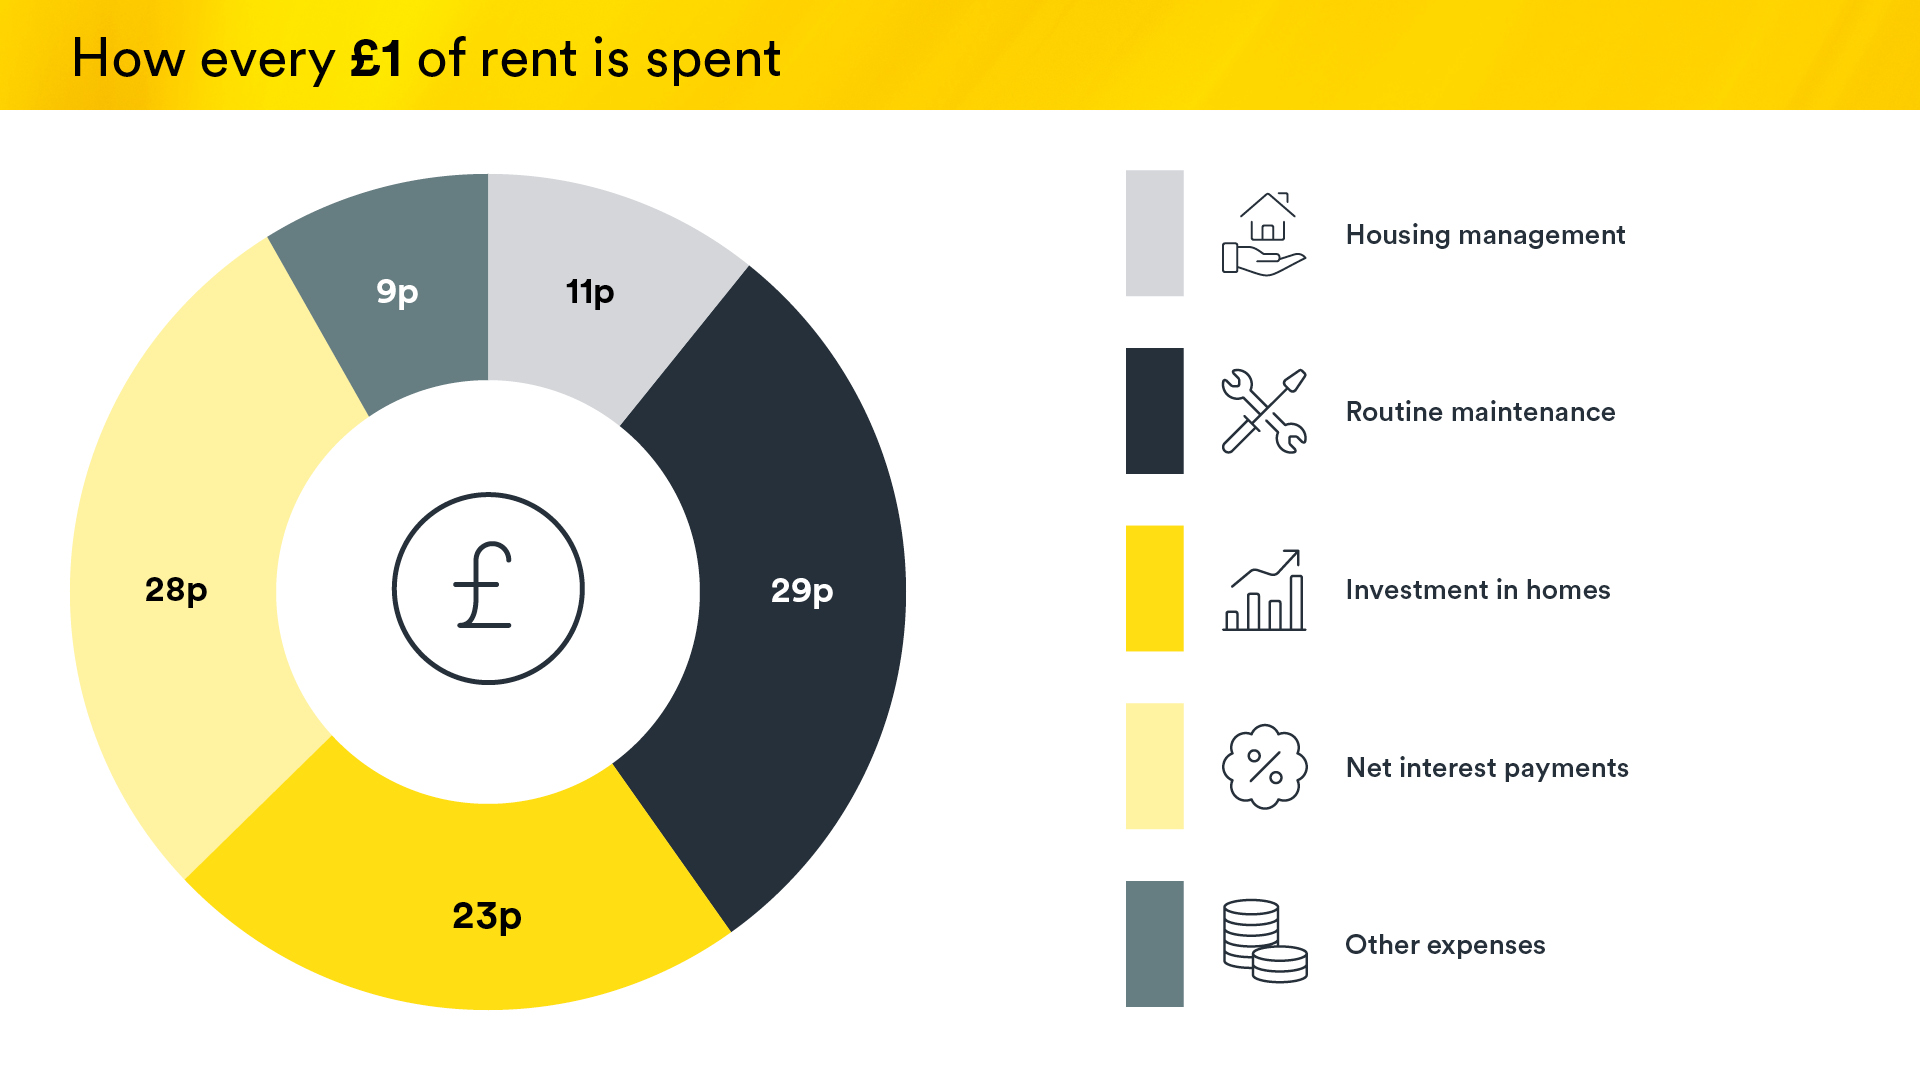 A graph showing how every £1 of rent is spent